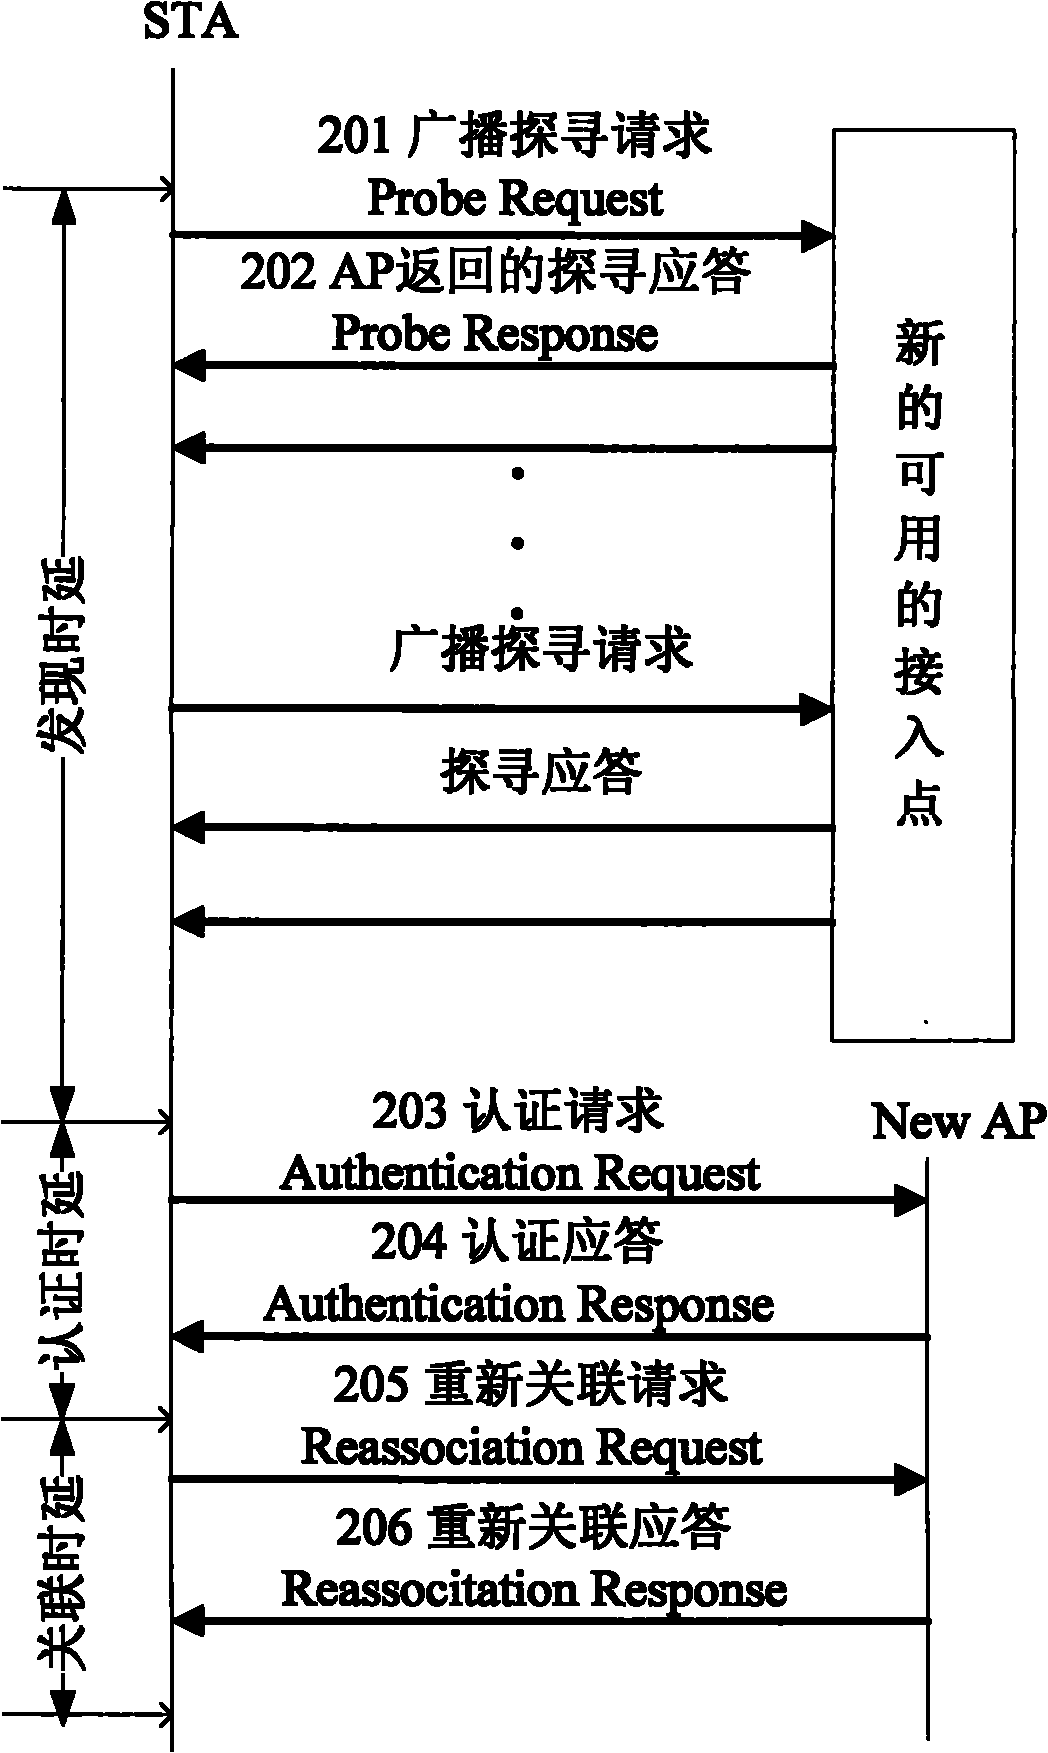 Method for improving quality of service (QoS) of real-time service in wireless local area network based on service differentiation